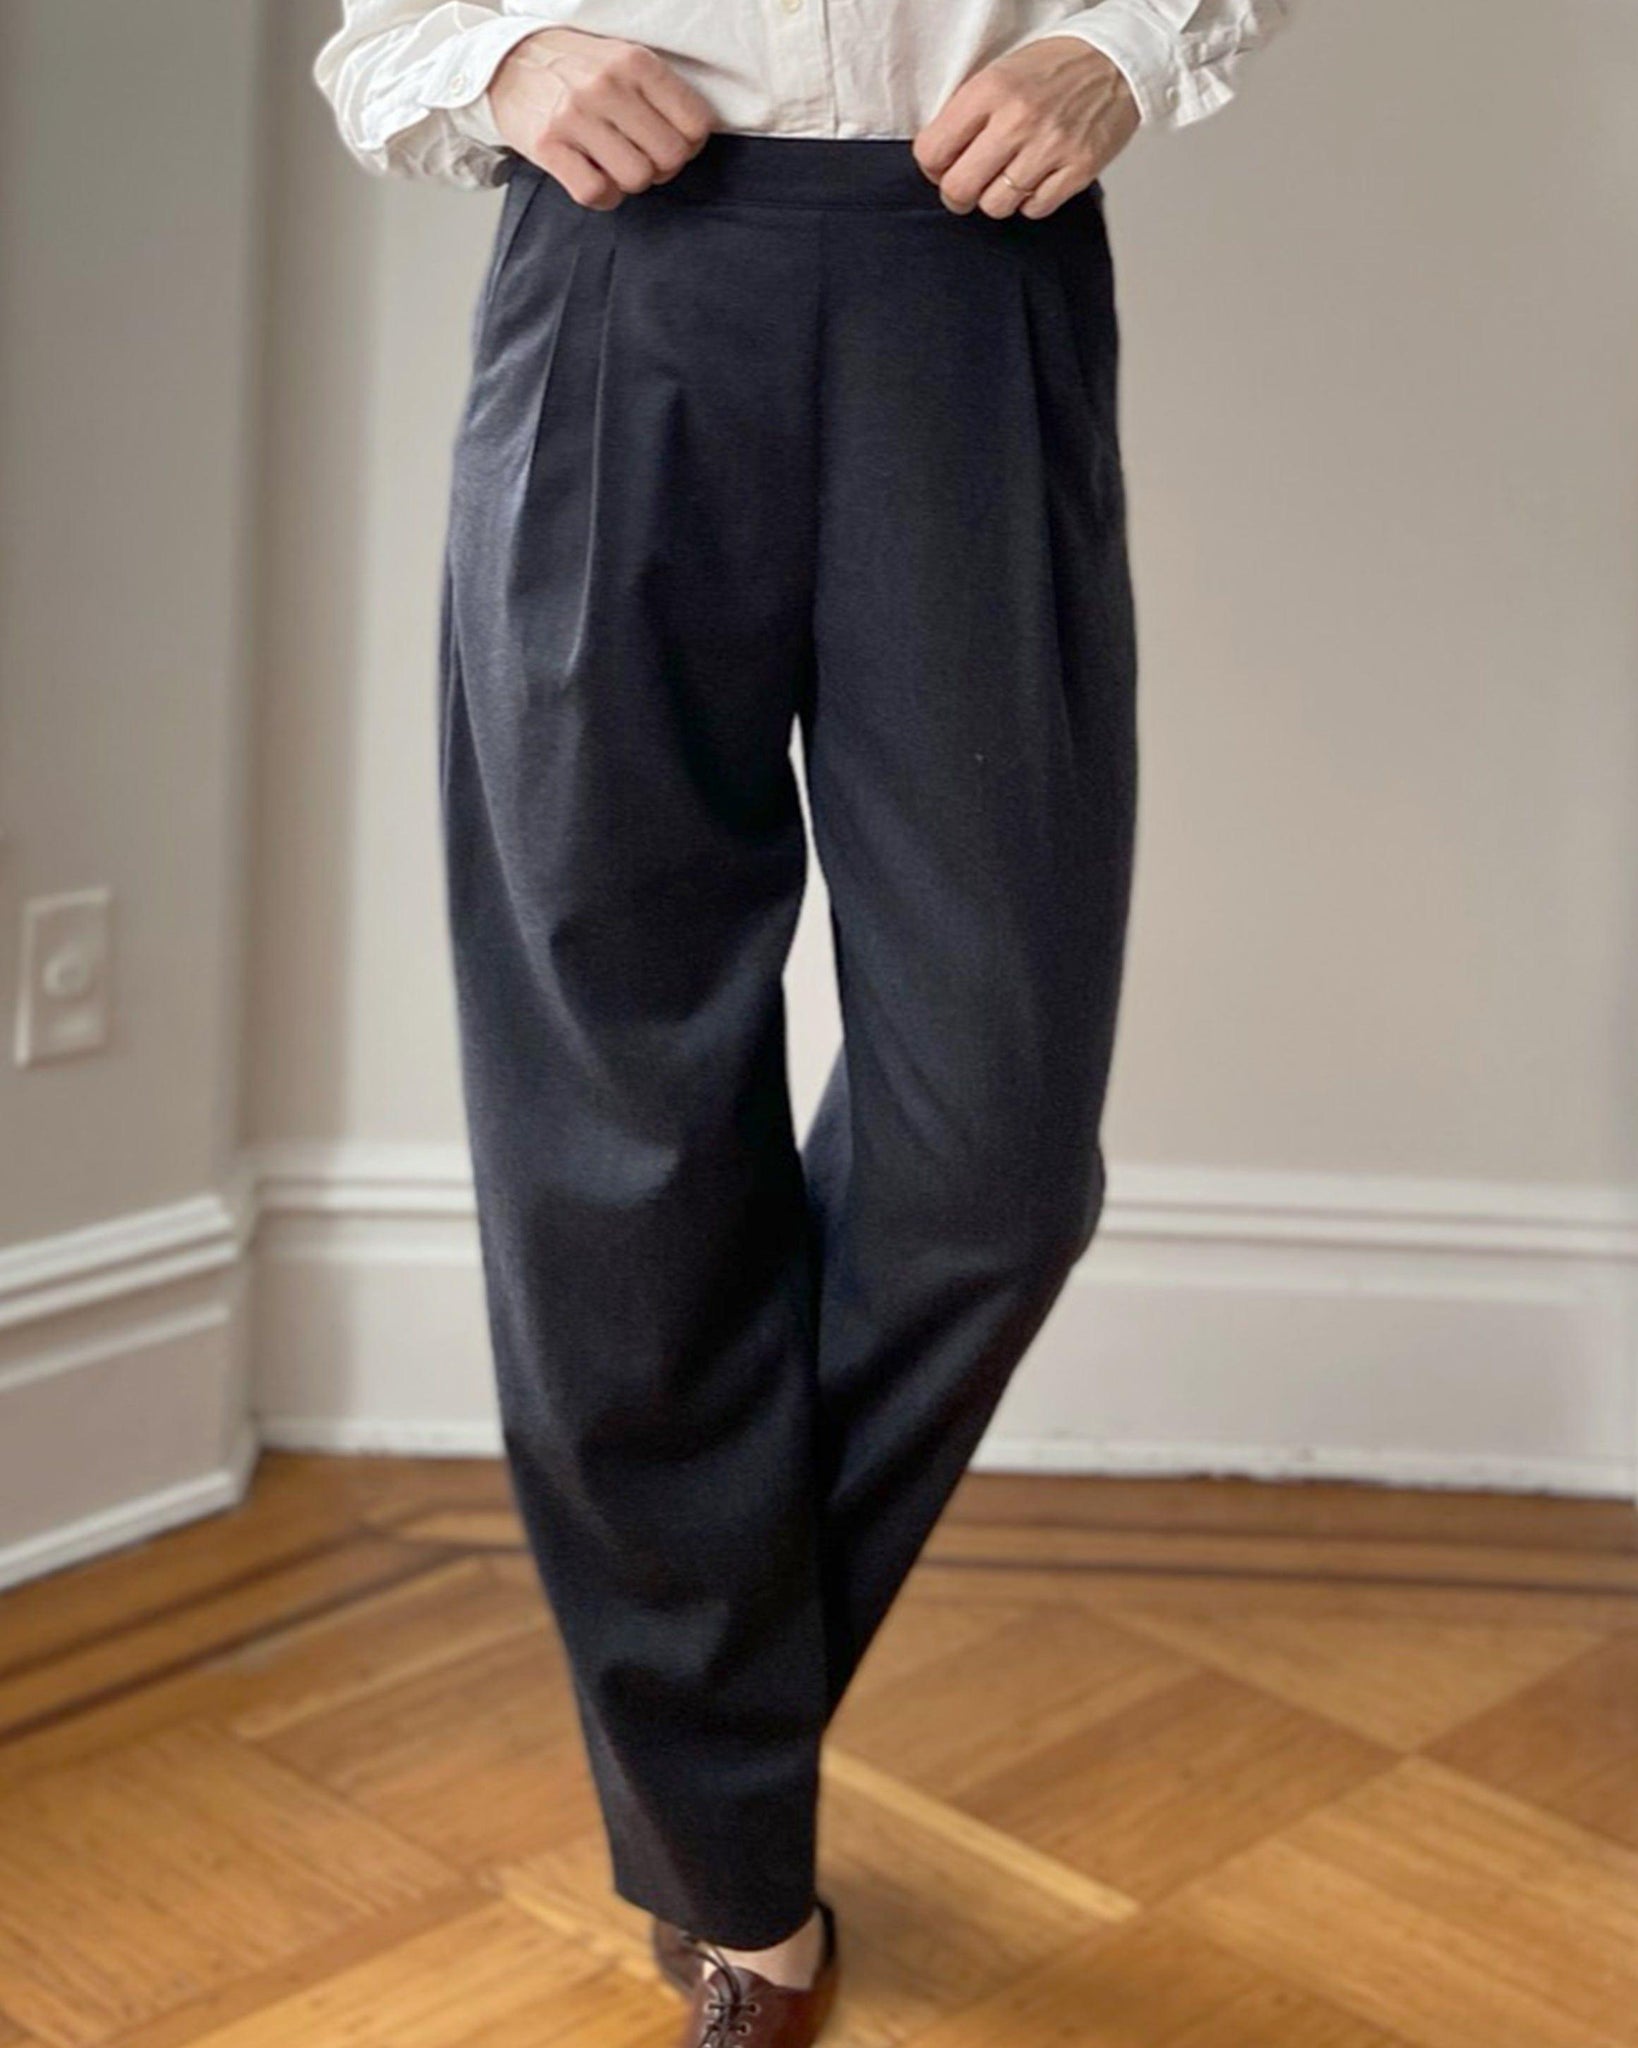 THE Trouser in tropical rws wool by 4 in PANTS